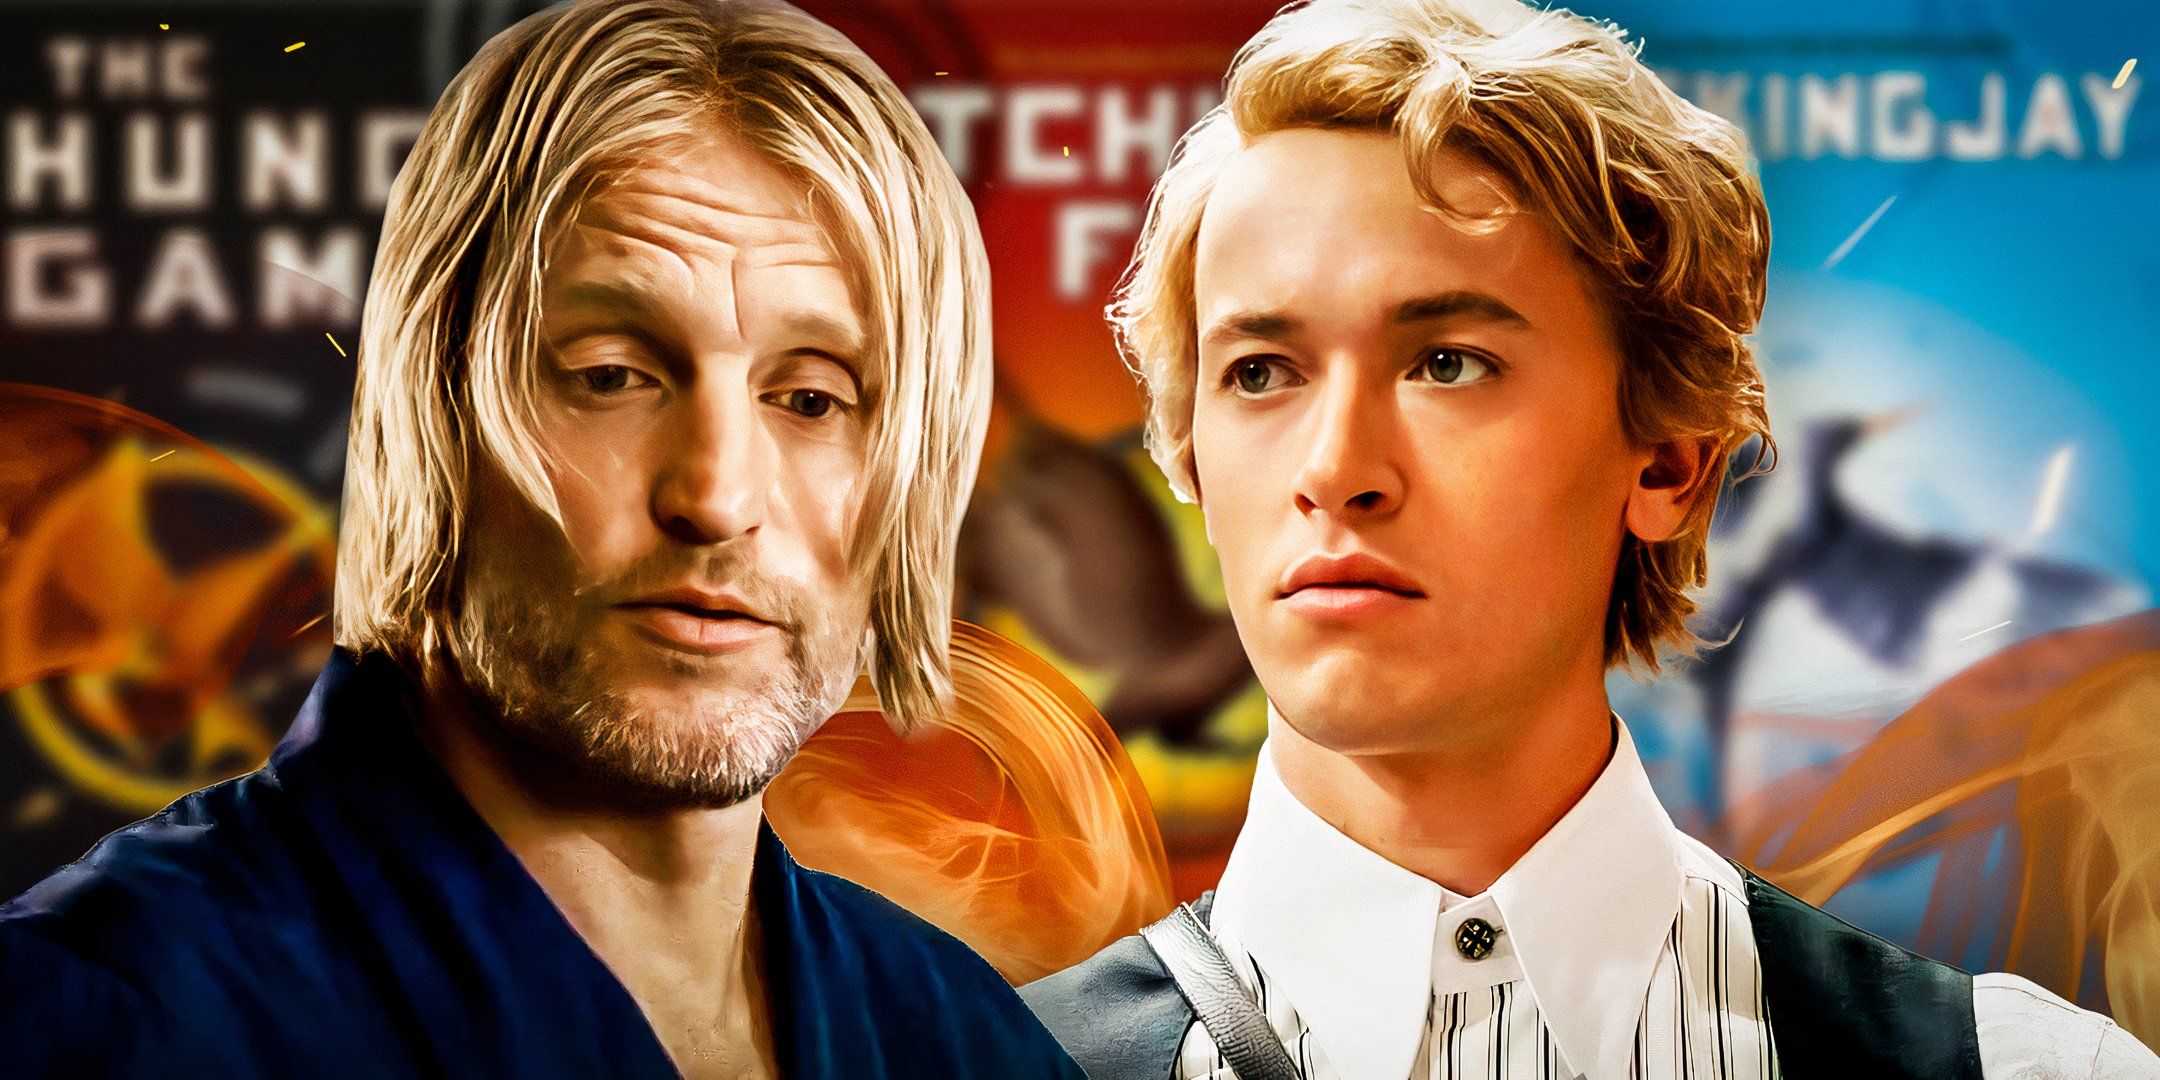 Woody Harrelson as Haymitch in The Hunger Games and Tom Blyth as Snow in The Ballad of Songbirds and Snakes.